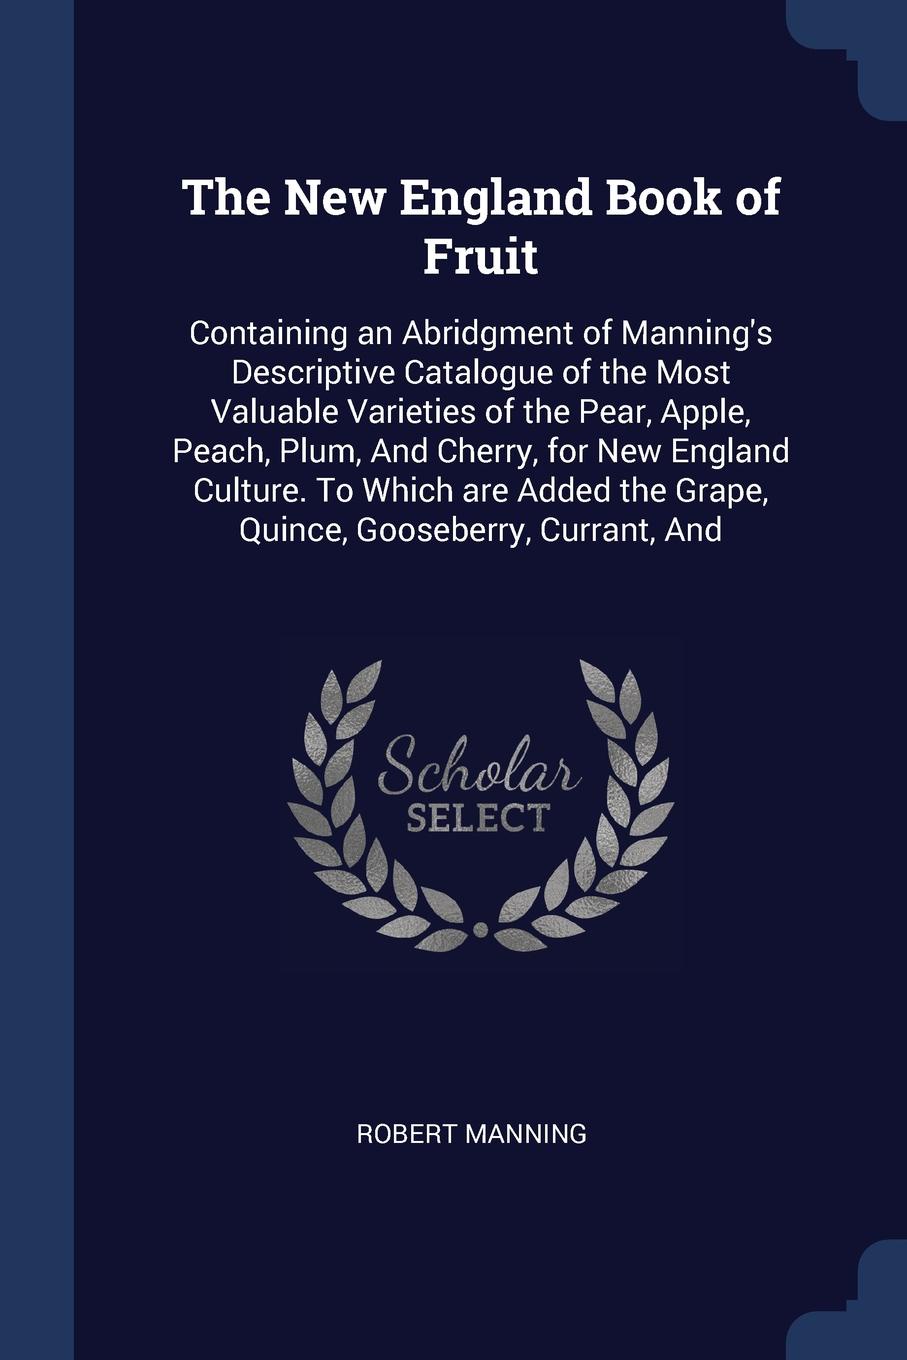 The New England Book of Fruit. Containing an Abridgment of Manning`s Descriptive Catalogue of the Most Valuable Varieties of the Pear, Apple, Peach, Plum, And Cherry, for New England Culture. To Which are Added the Grape, Quince, Gooseberry, Curra...